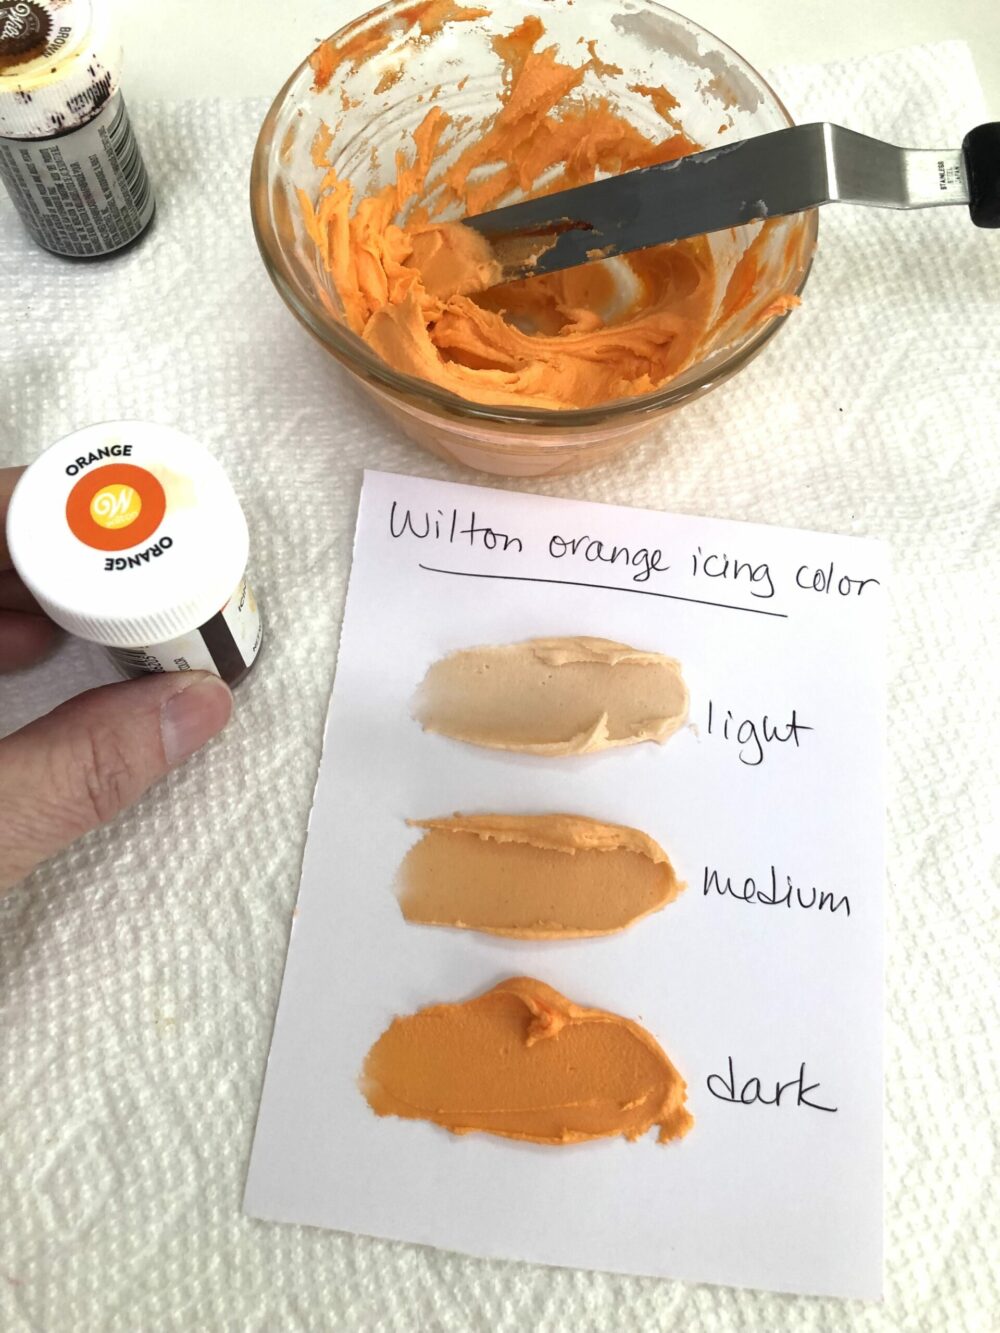 Wilton orange food coloring and icing